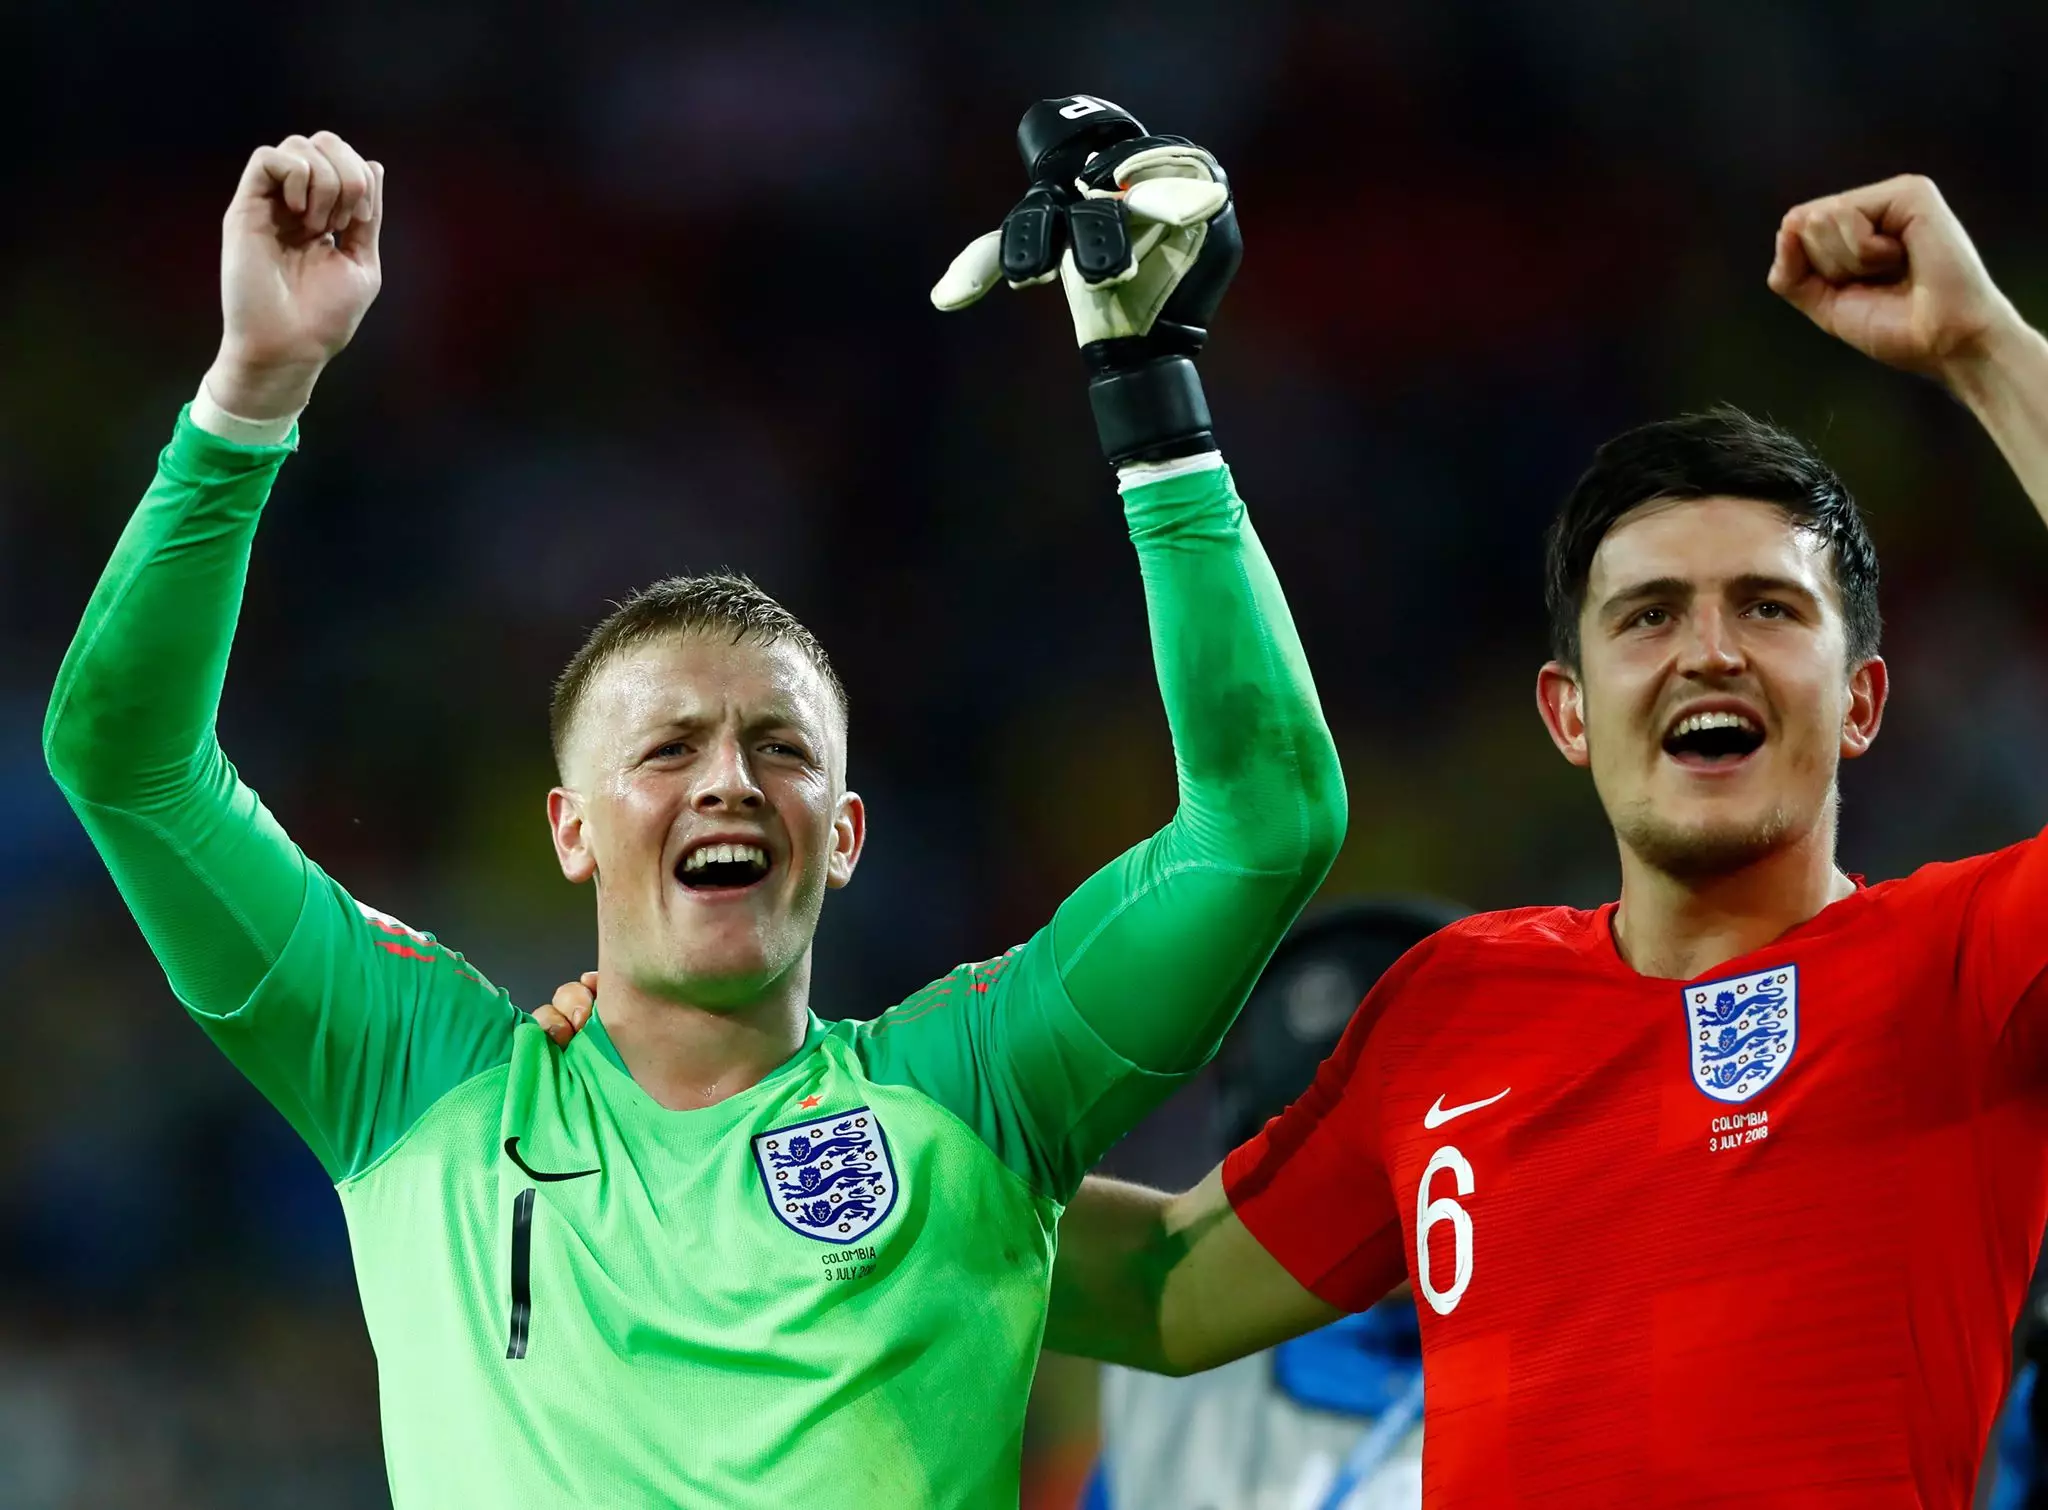 Pickford celebrates after beating Colombia. Image: Pa